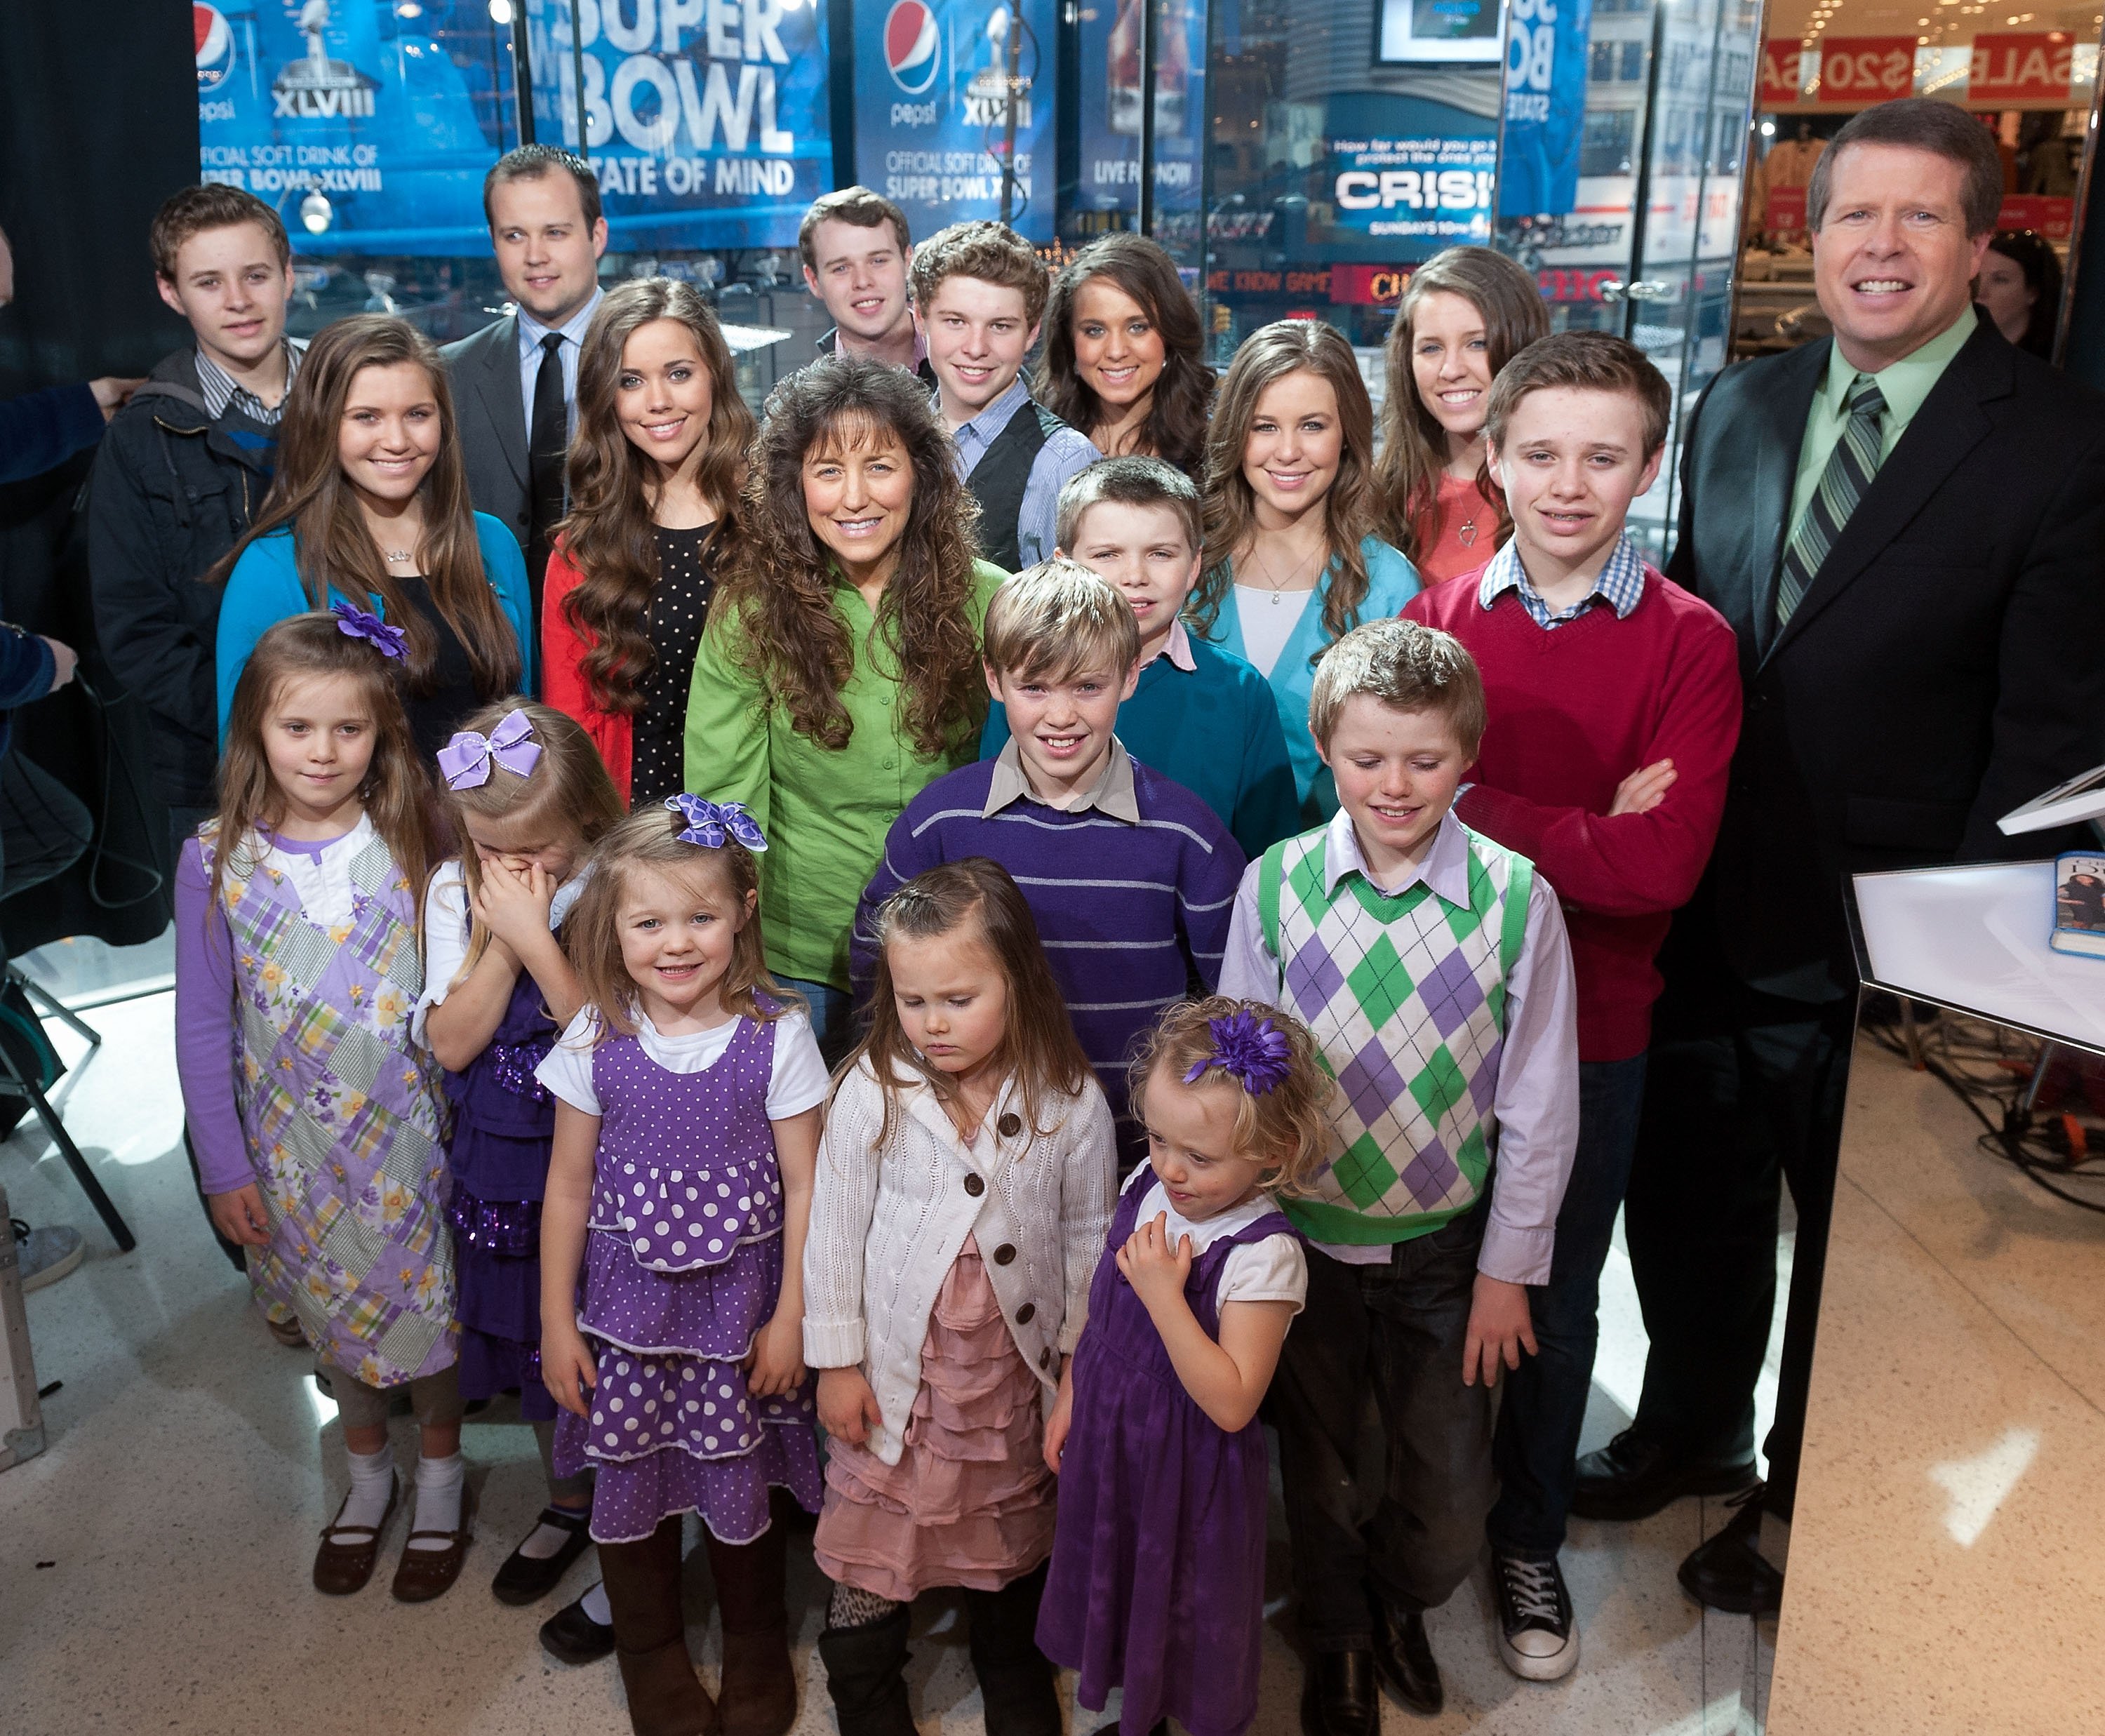 The Duggar family visits "Extra" in their New York Studios at H&M in Times Square on March 11, 2014 | Photo: Getty Images